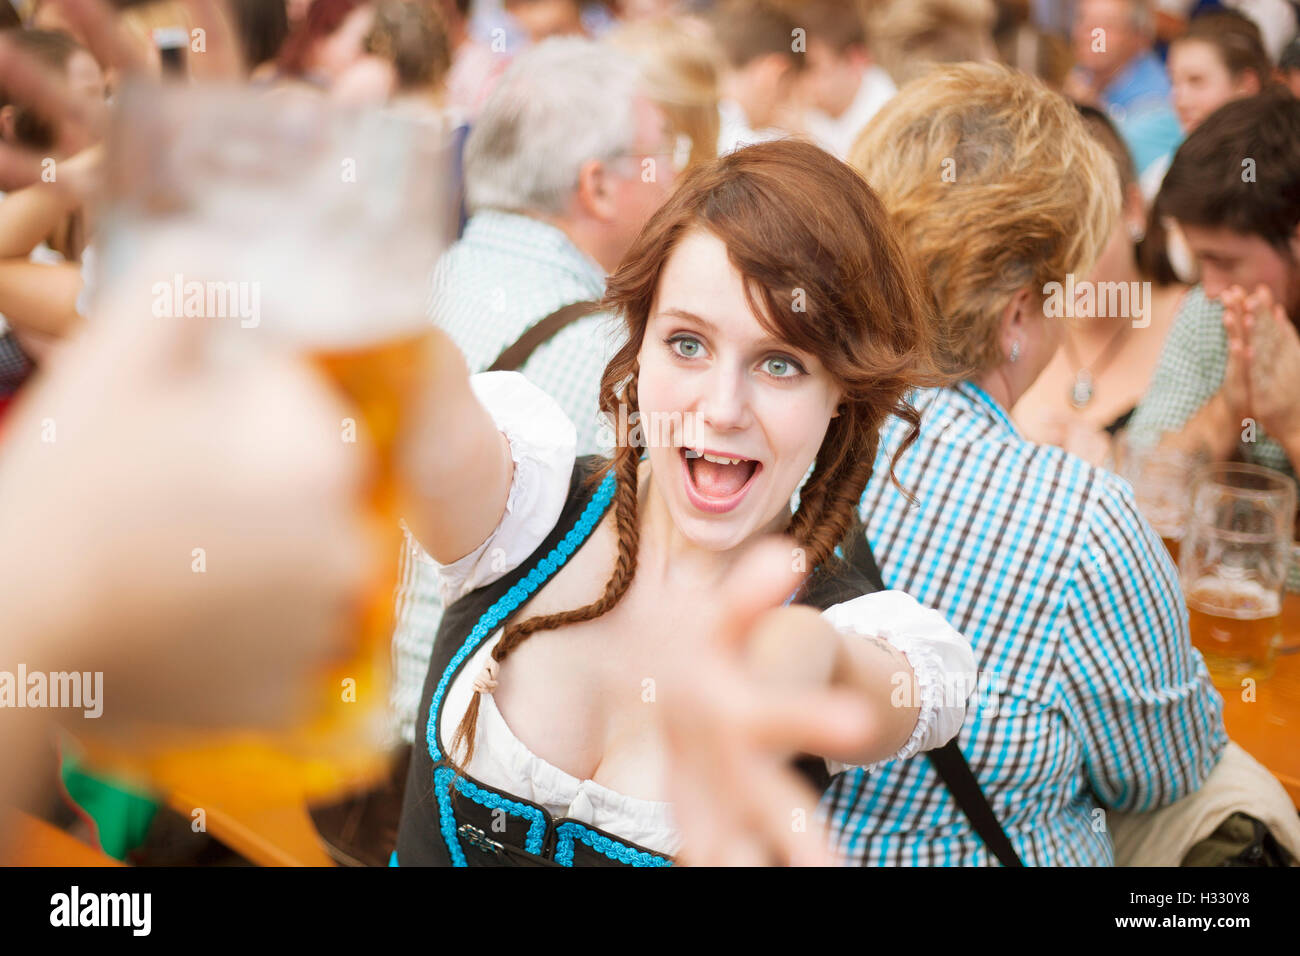 Excited girl reaches for a mug of beer at Oktoberfest Stock Photo